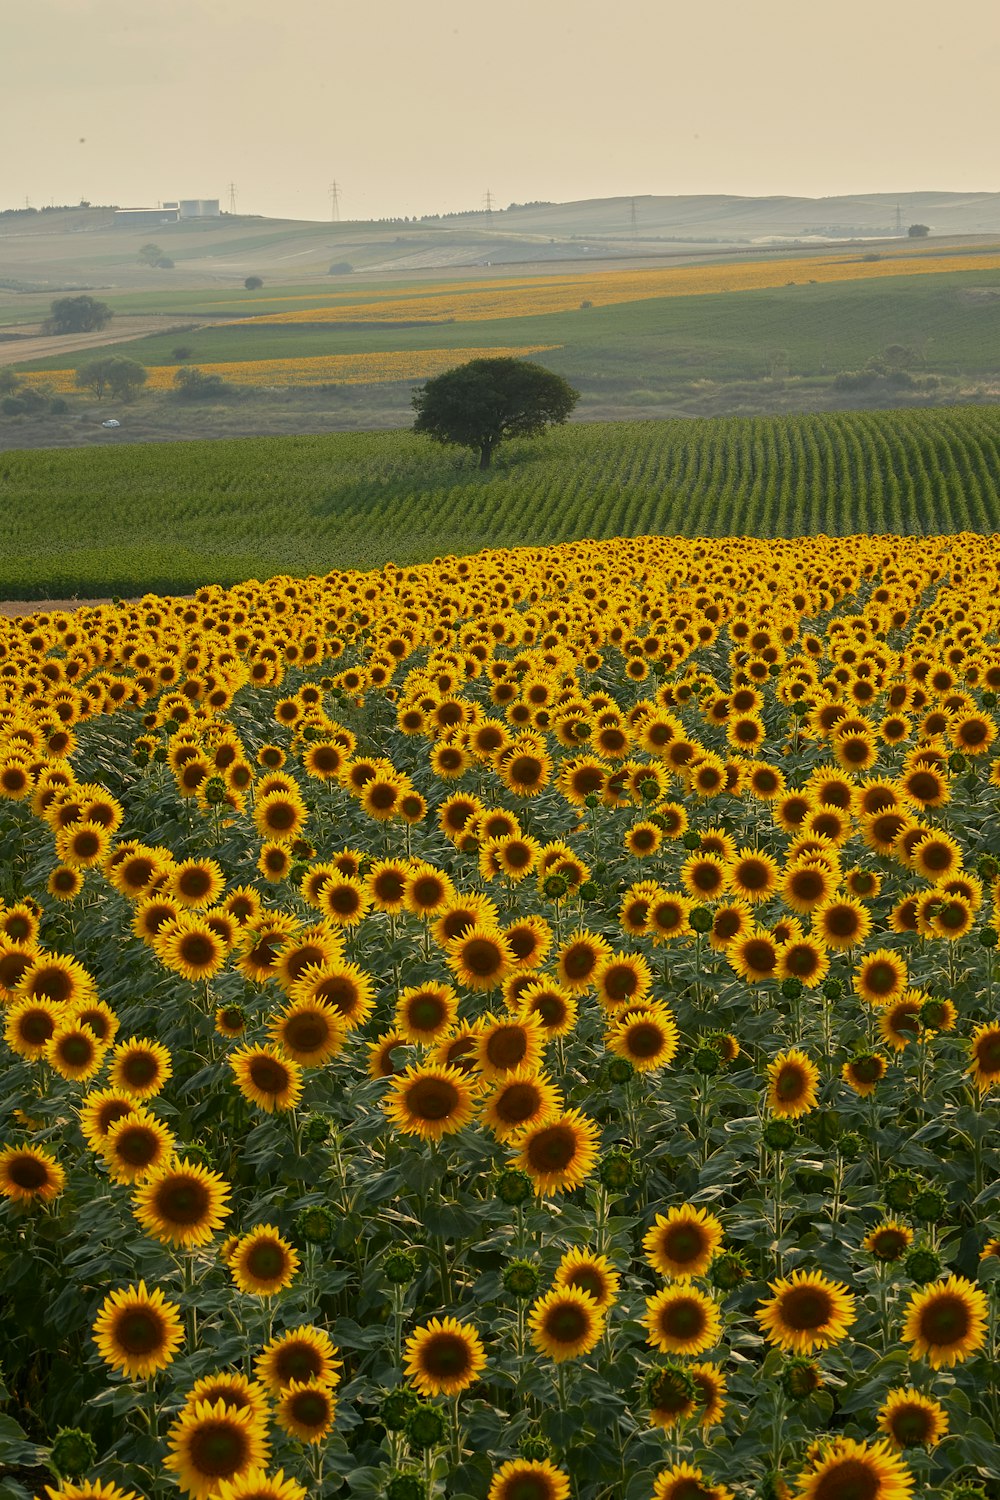 a large field of sunflowers in a rural area